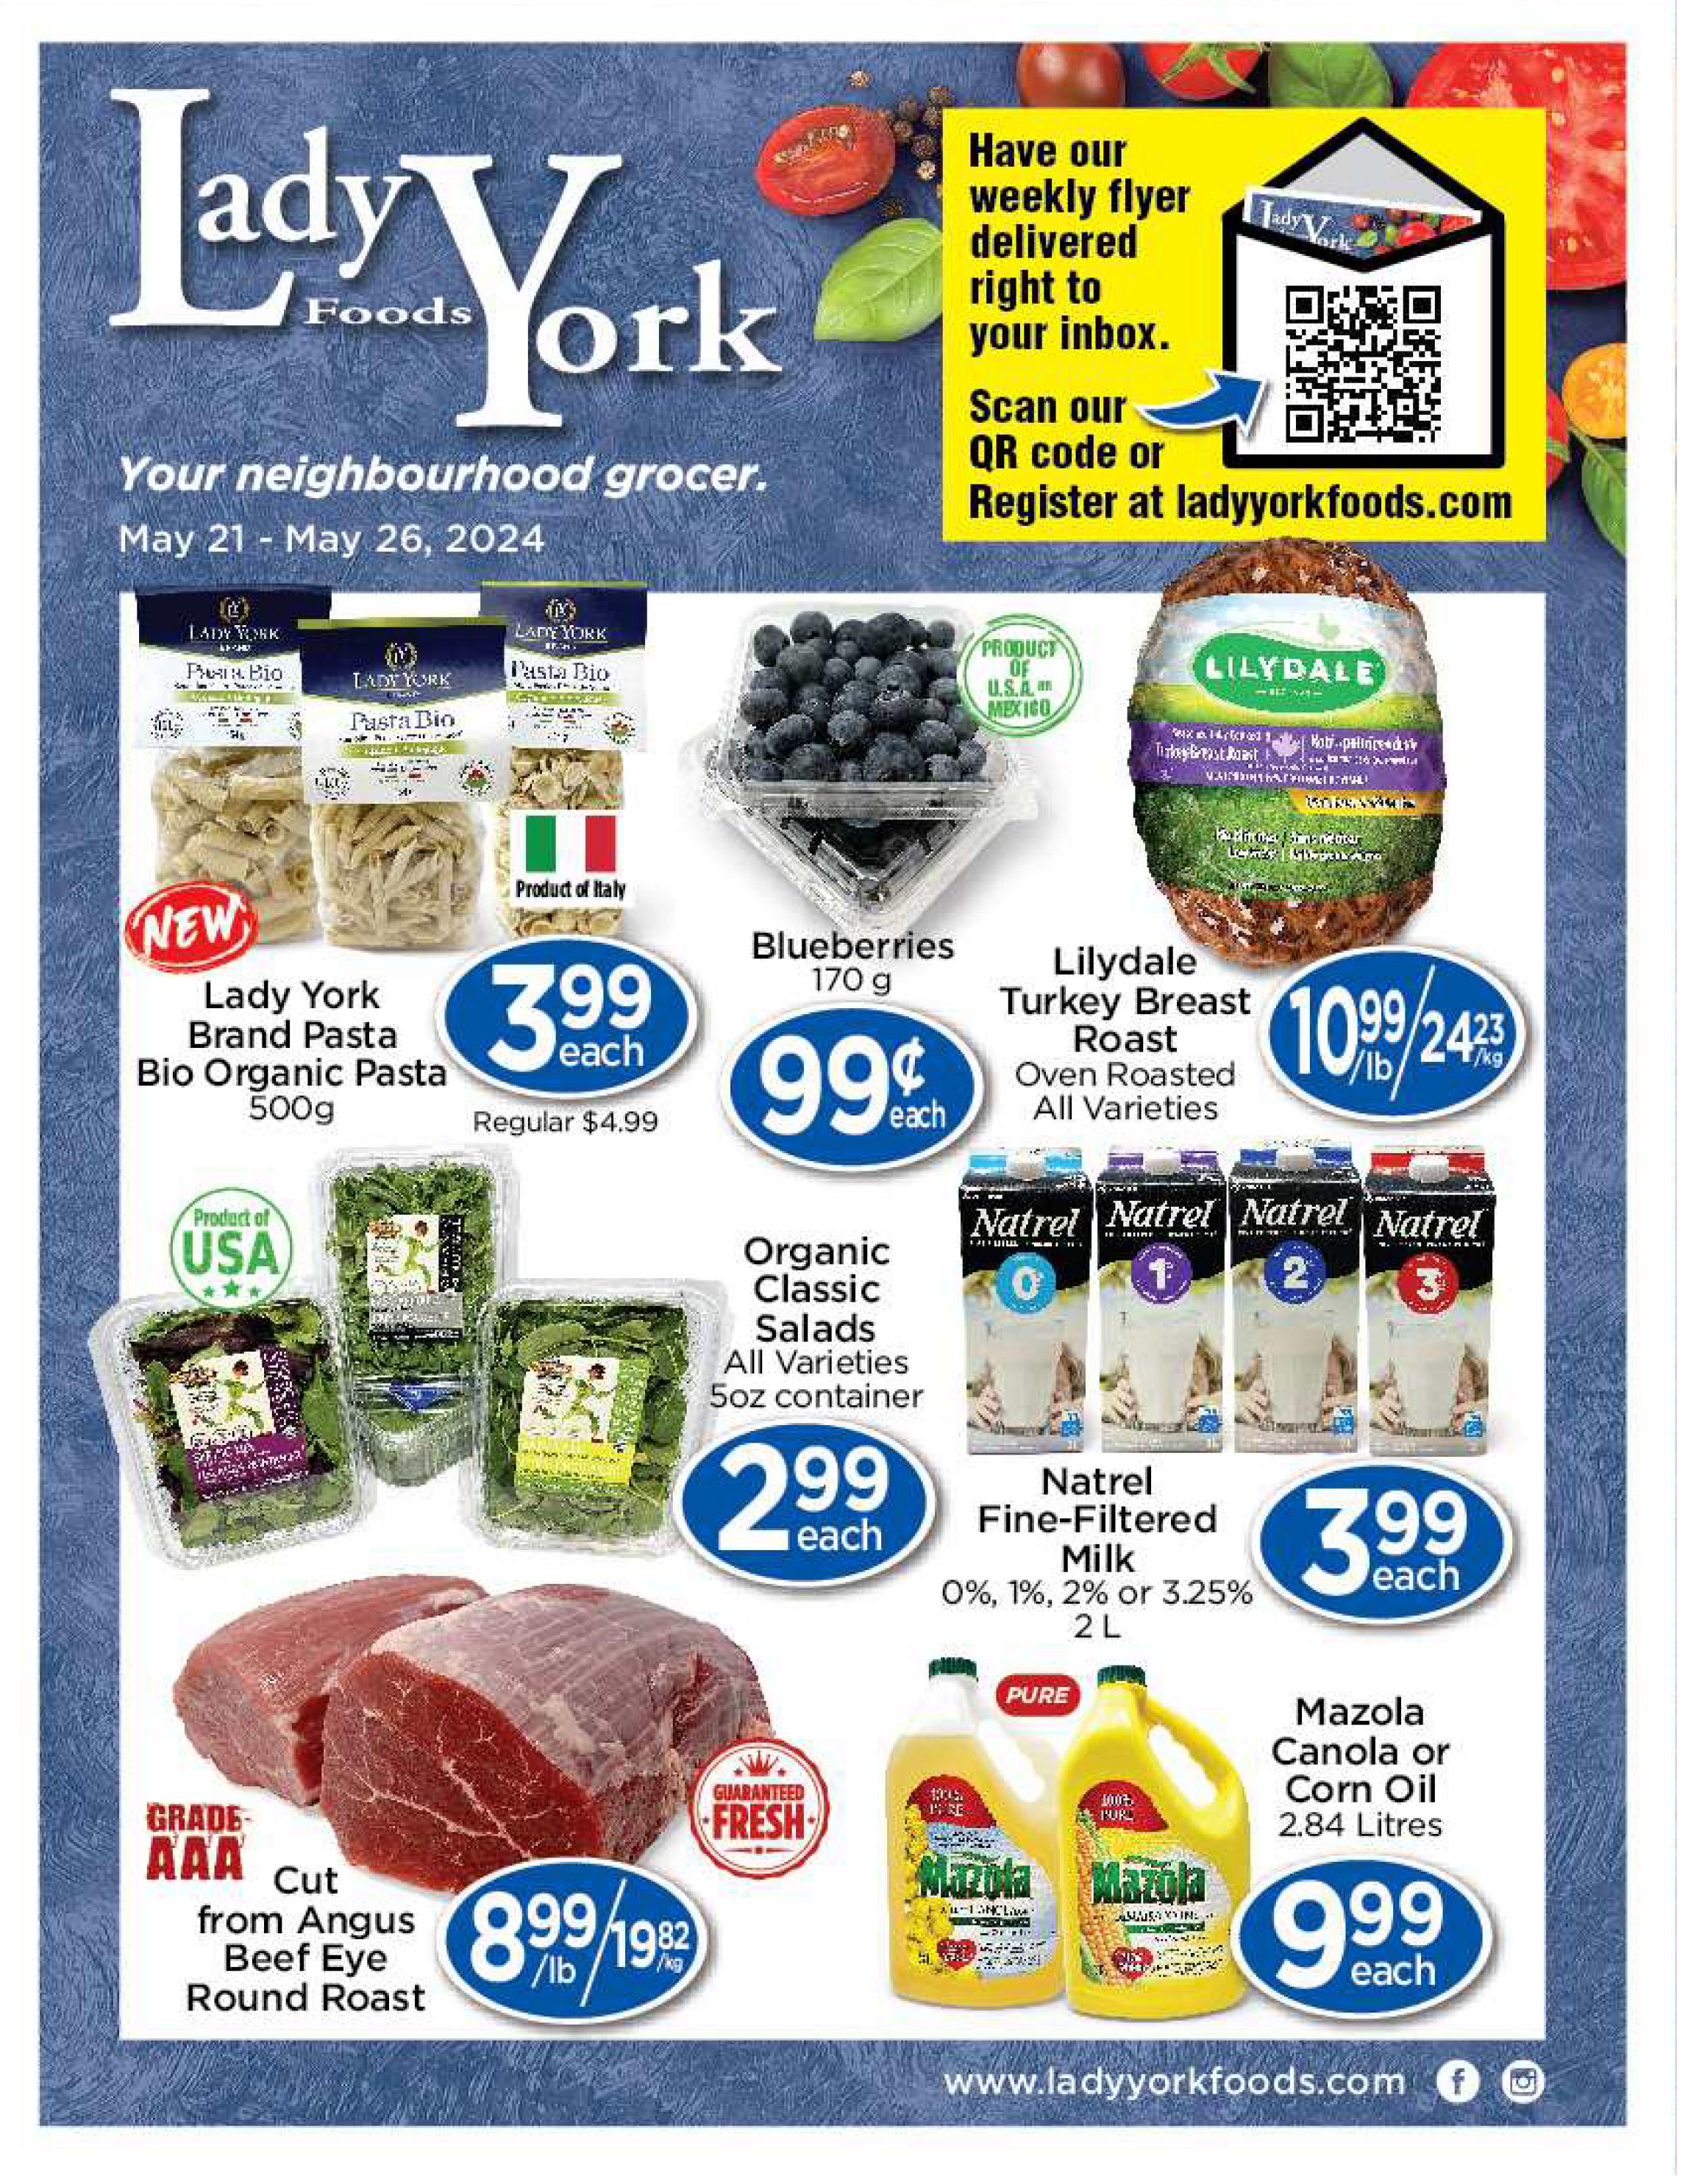 Lady York Foods - Weekly Flyer Specials